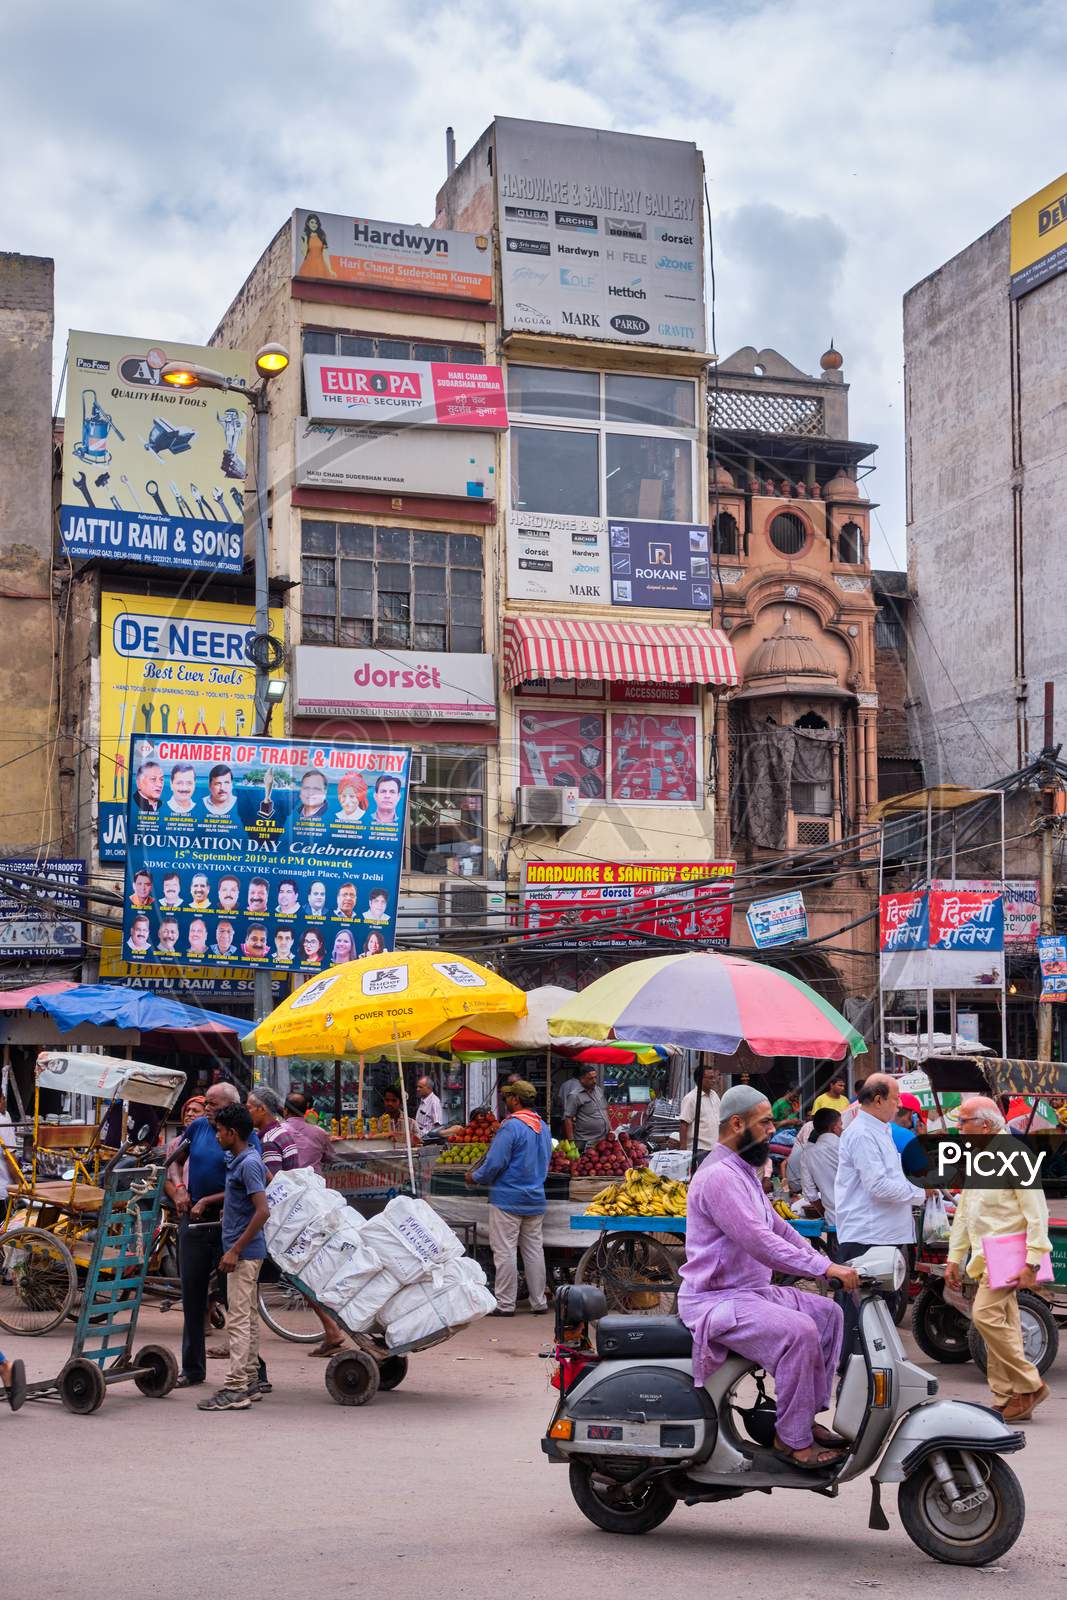 Chandni Chowk, Busy Shopping Area In Old Delhi With Bazaars And Colorful Narrow Streets